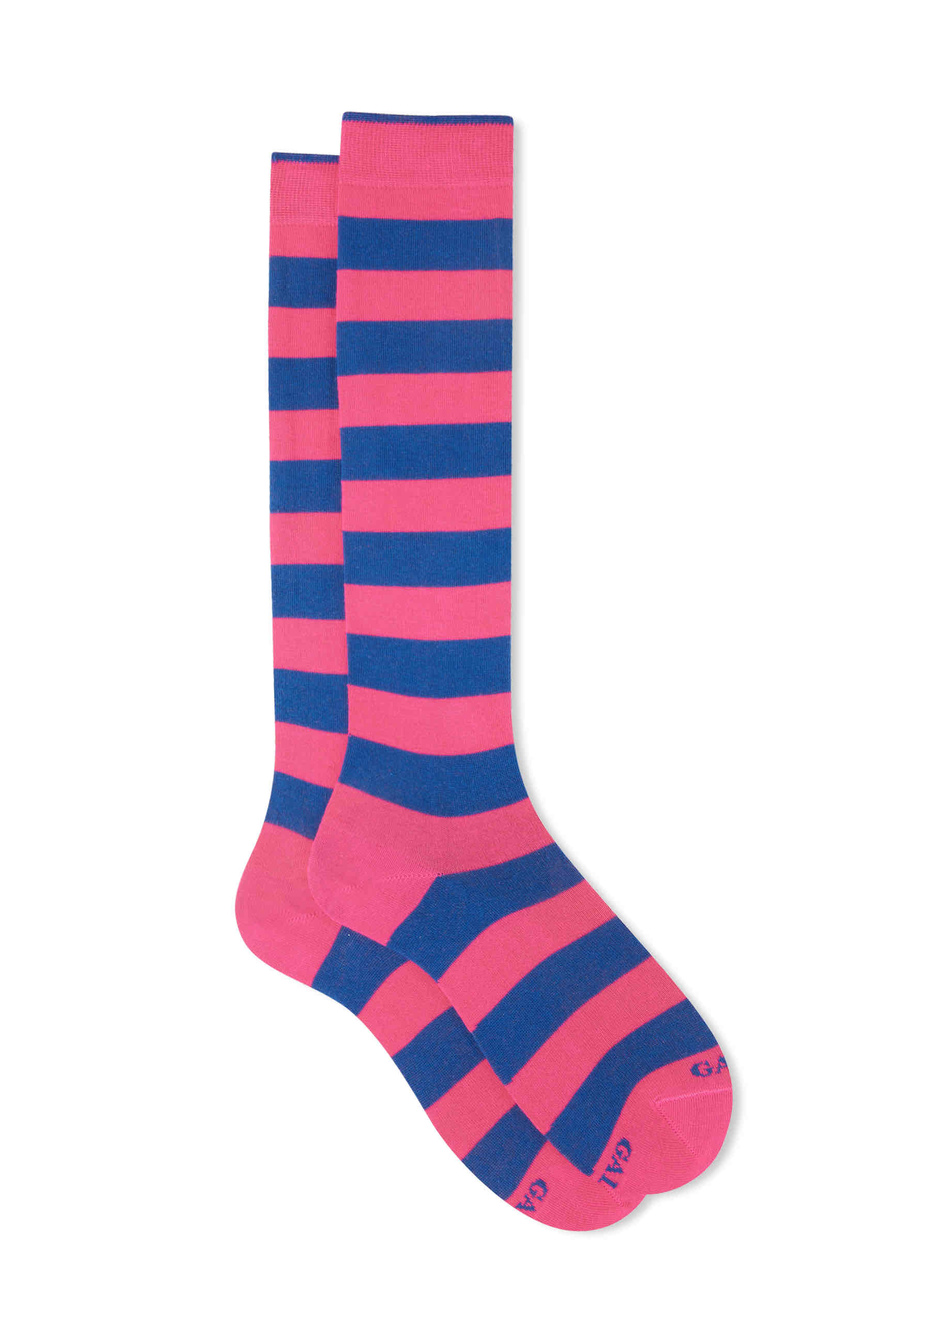 Women's long hyacinth cotton socks with two-tone stripes - Gallo 1927 - Official Online Shop